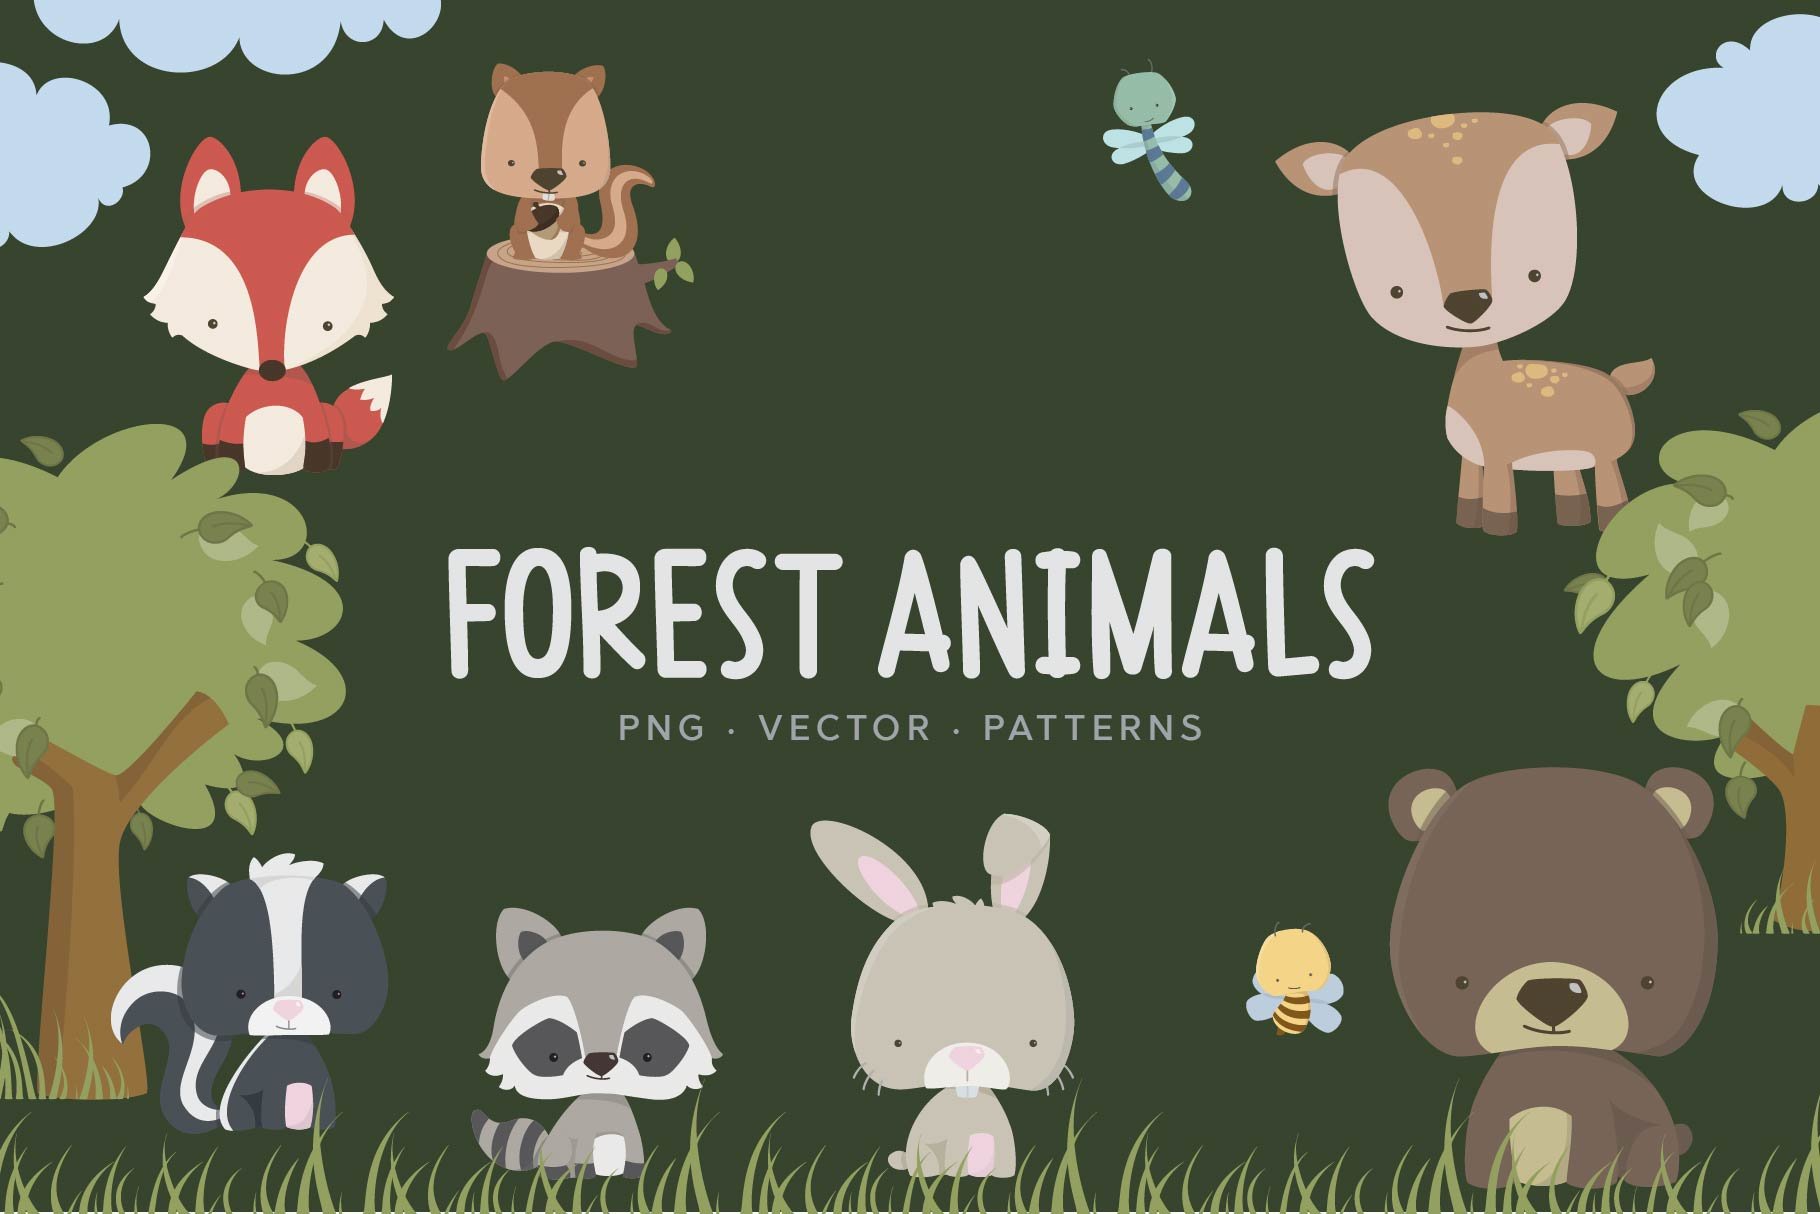 Little Forest Animals & Patterns cover image.